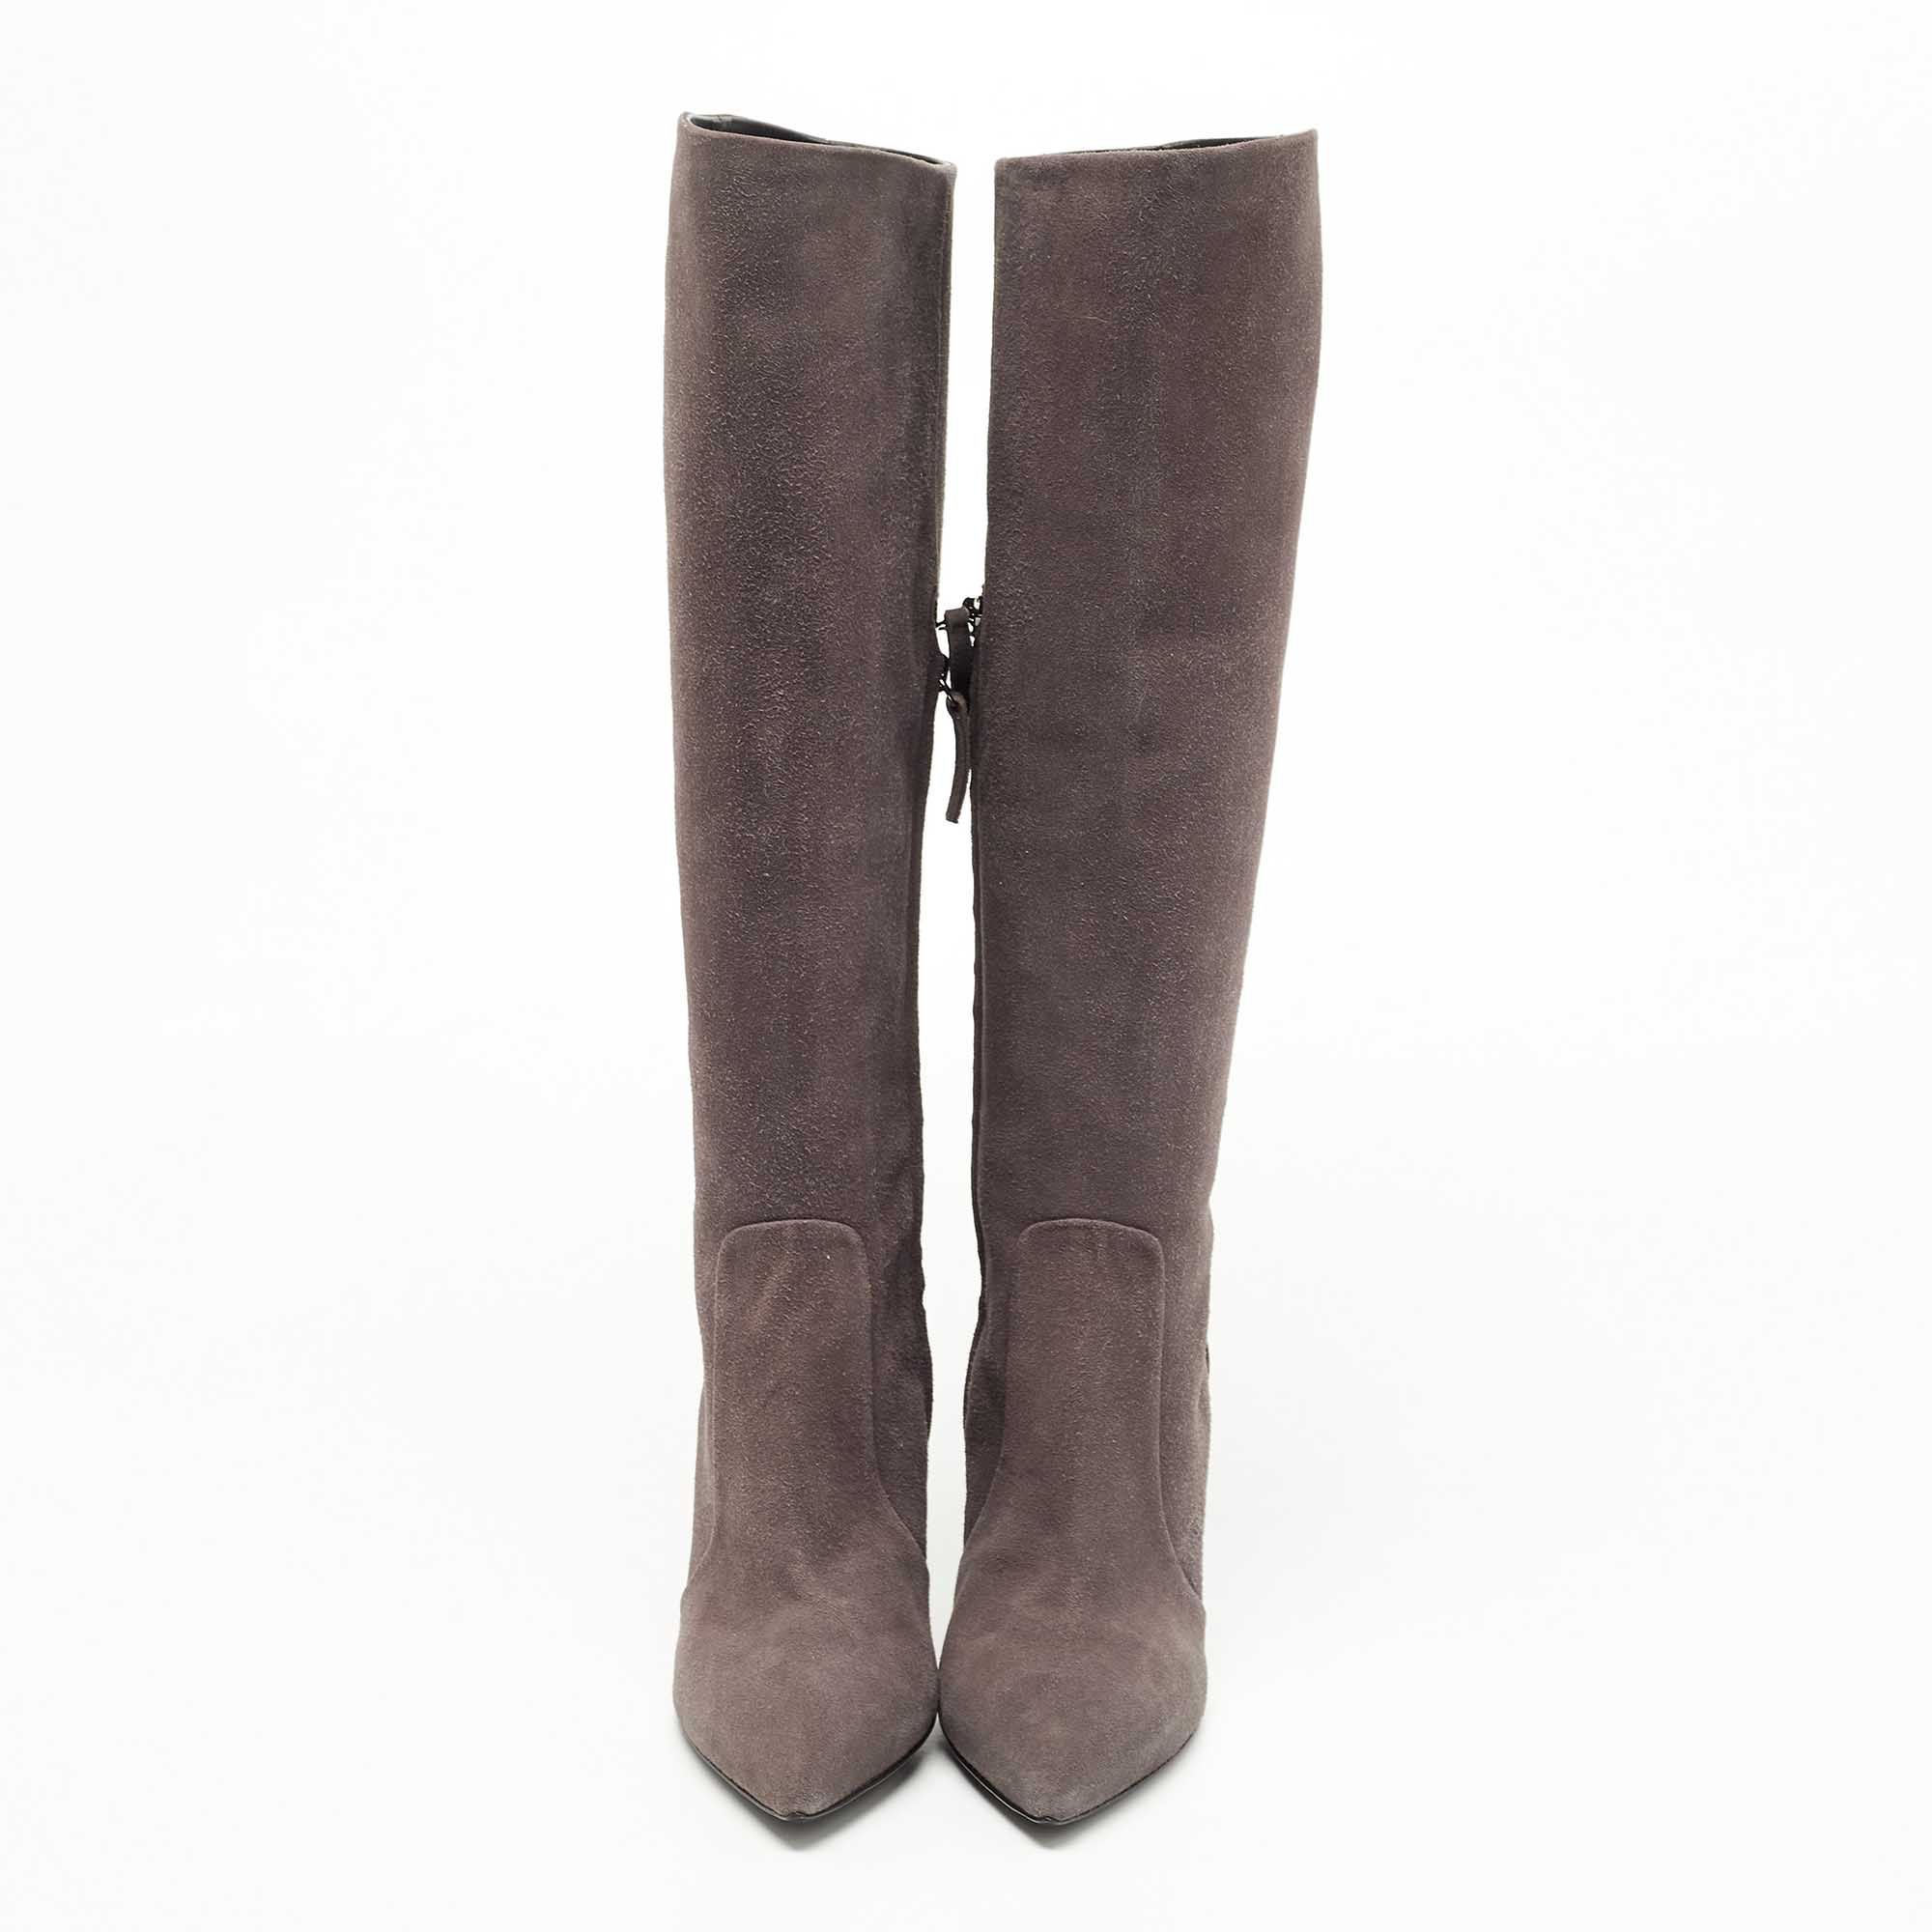 Giuseppe Zanotti Grey Suede Pointed Knee Length Boots Size 37